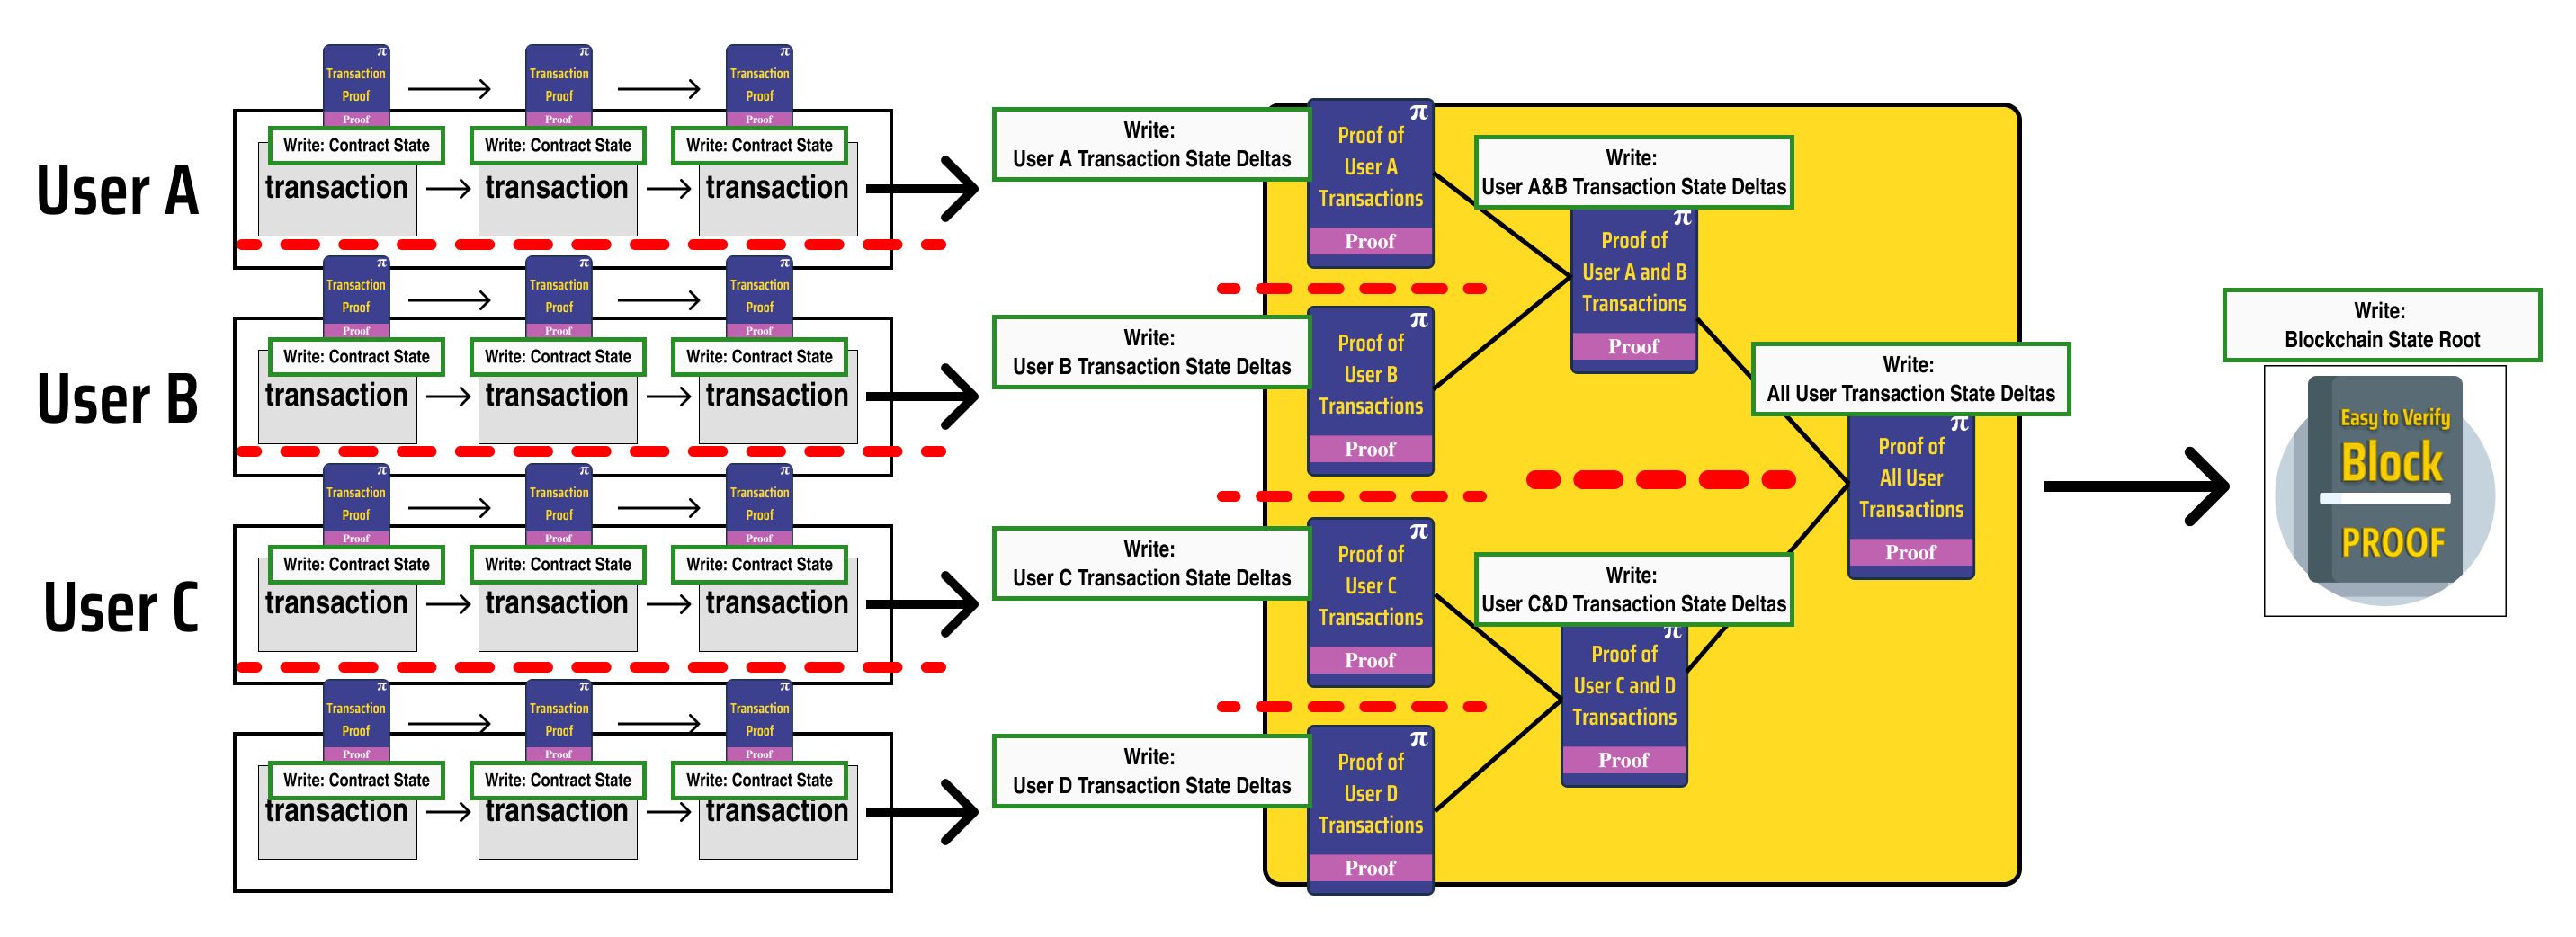 with-marked-diagram-full-divided.png